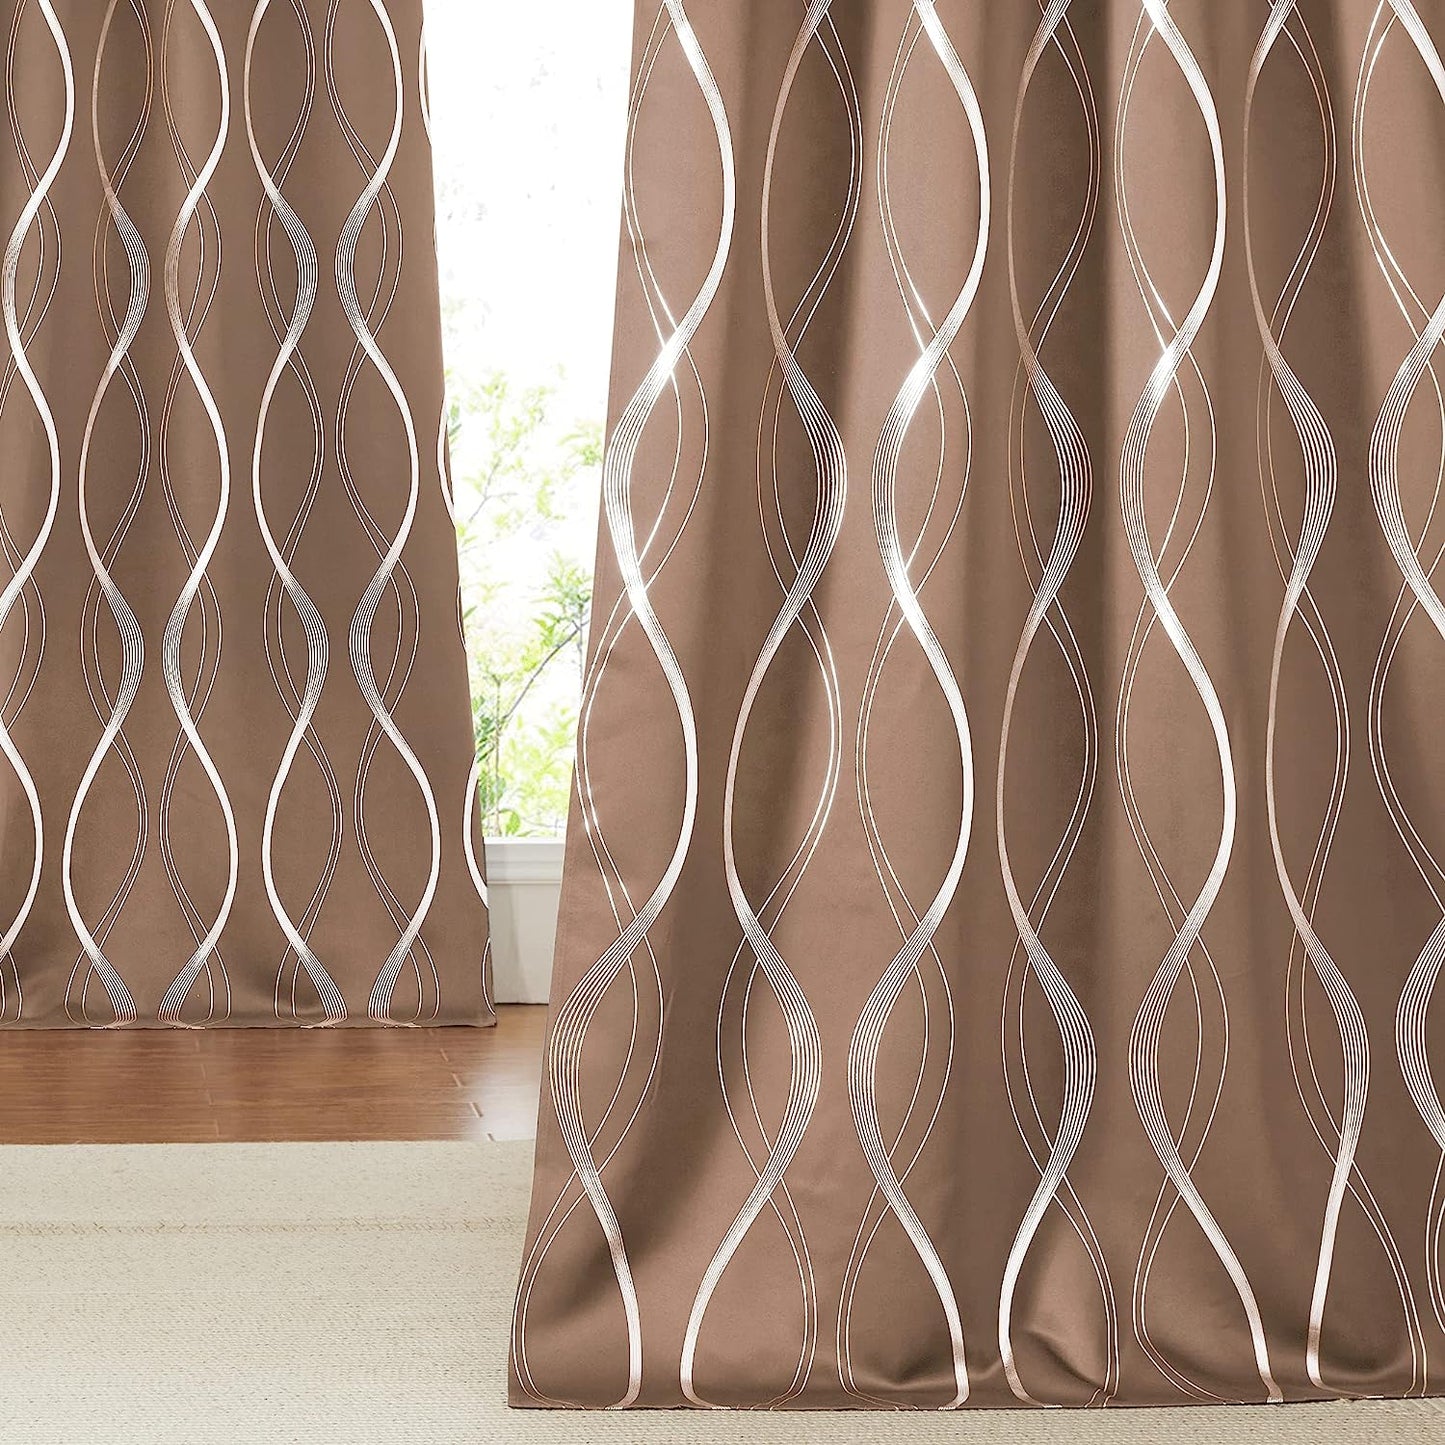 NICETOWN Grey Blackout Curtains 84 Inch Length 2 Panels Set for Bedroom/Living Room, Noise Reducing Thermal Insulated Wave Line Foil Print Drapes for Patio Sliding Glass Door (52 X 84, Gray)  NICETOWN Cappuccino 42"W X 84"L 